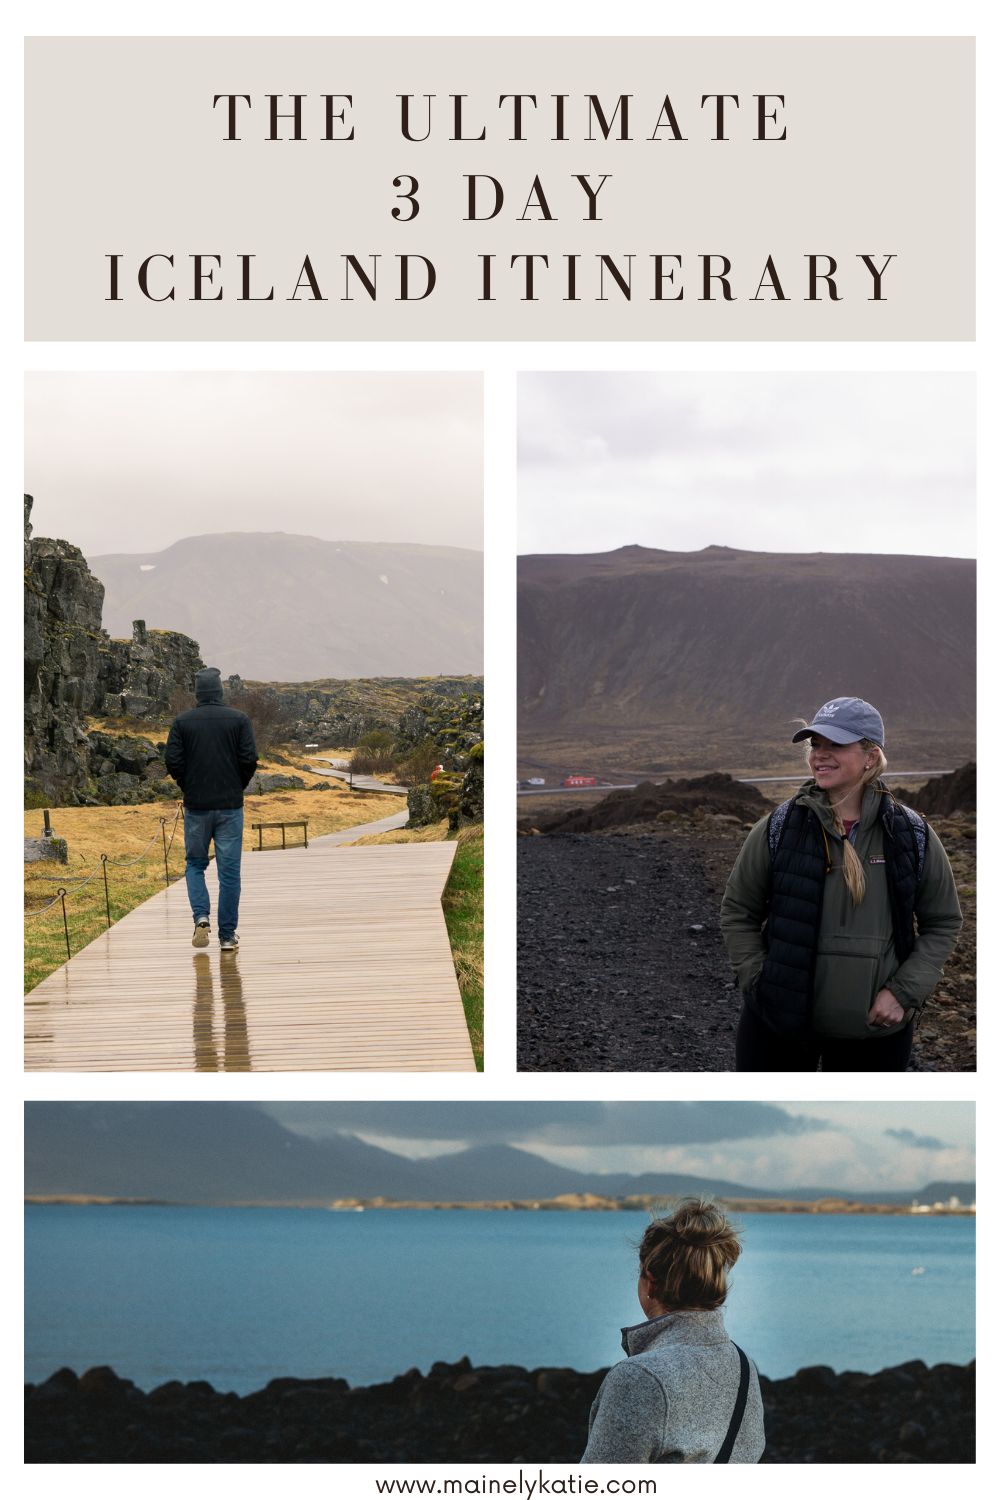 Iceland is unlike any place I have ever seen before. The landscapes are gorgeous with the lava rocks, adorable towns, steaming hot springs and incredible waterfalls. We had had a blast and got to see so much in the three days we were there. It rained for two out of the three days, but that didn't stop us from exploring! There is so much that you can do and see in Iceland in a short amount of time, so I put together the ultimate 3 day Iceland itinerary.